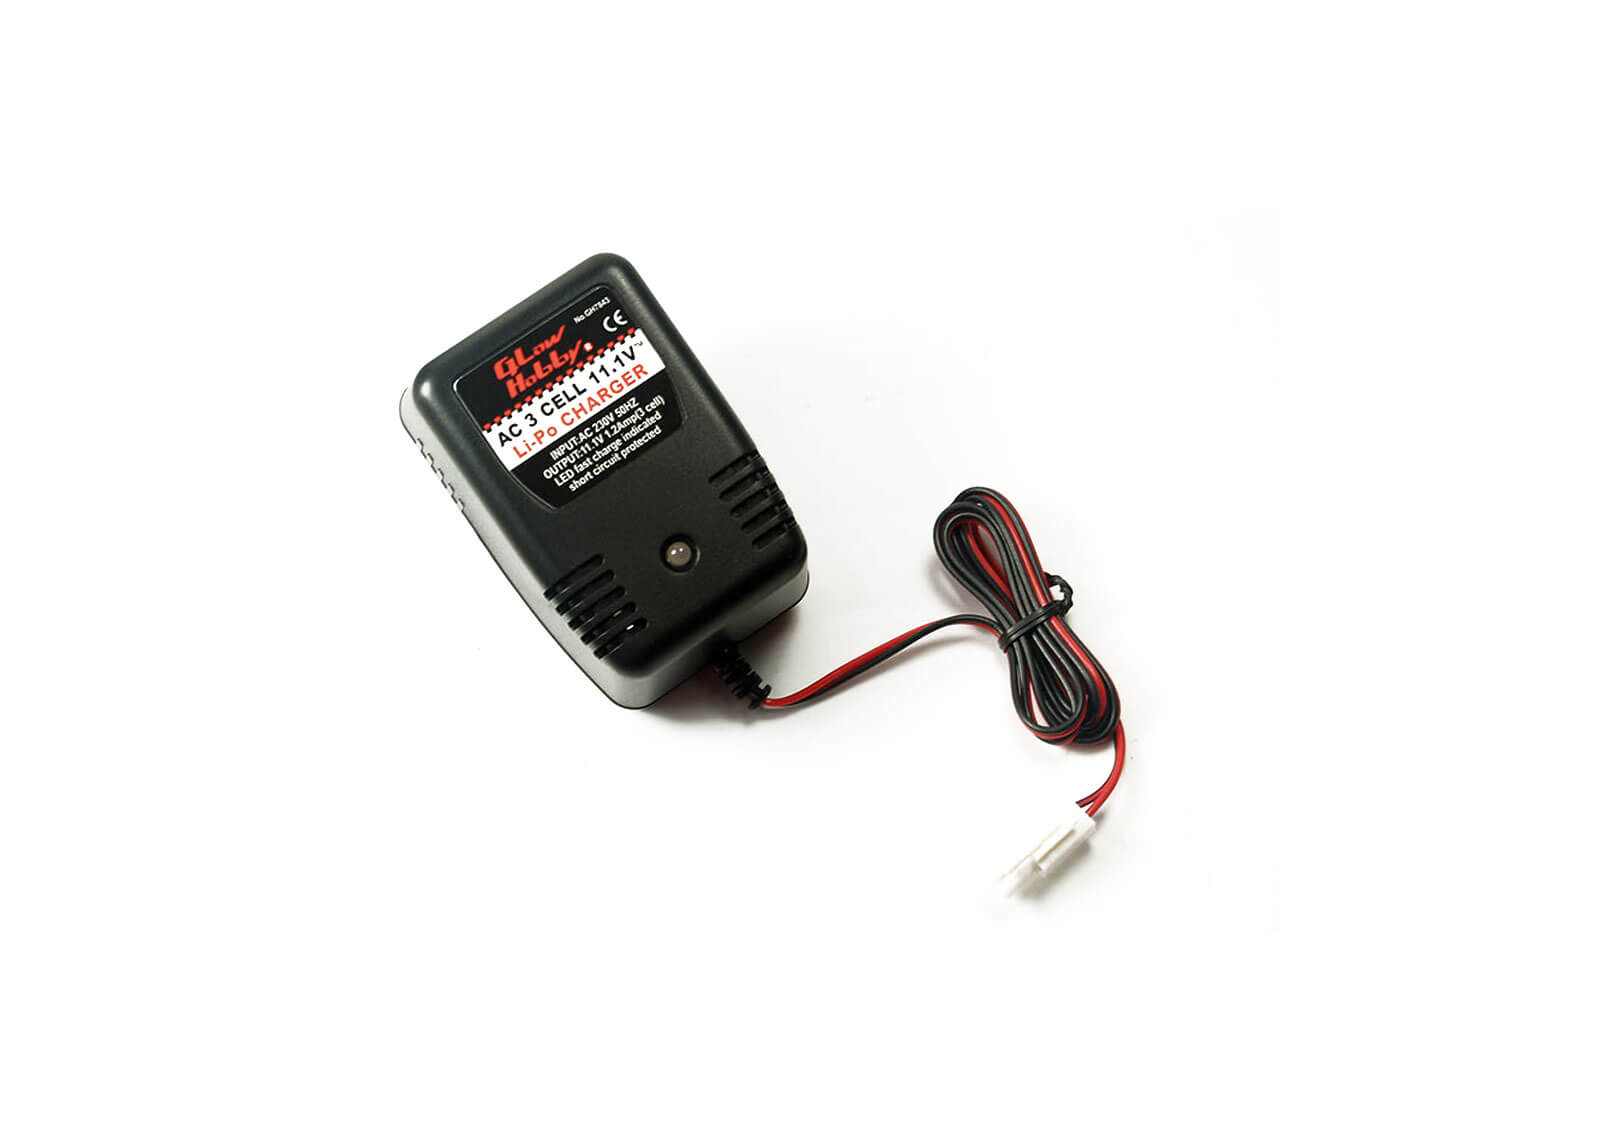 AC 3 CELL LI- POLYMER CHARGER/ 230V - Modify Airsoft Accessories